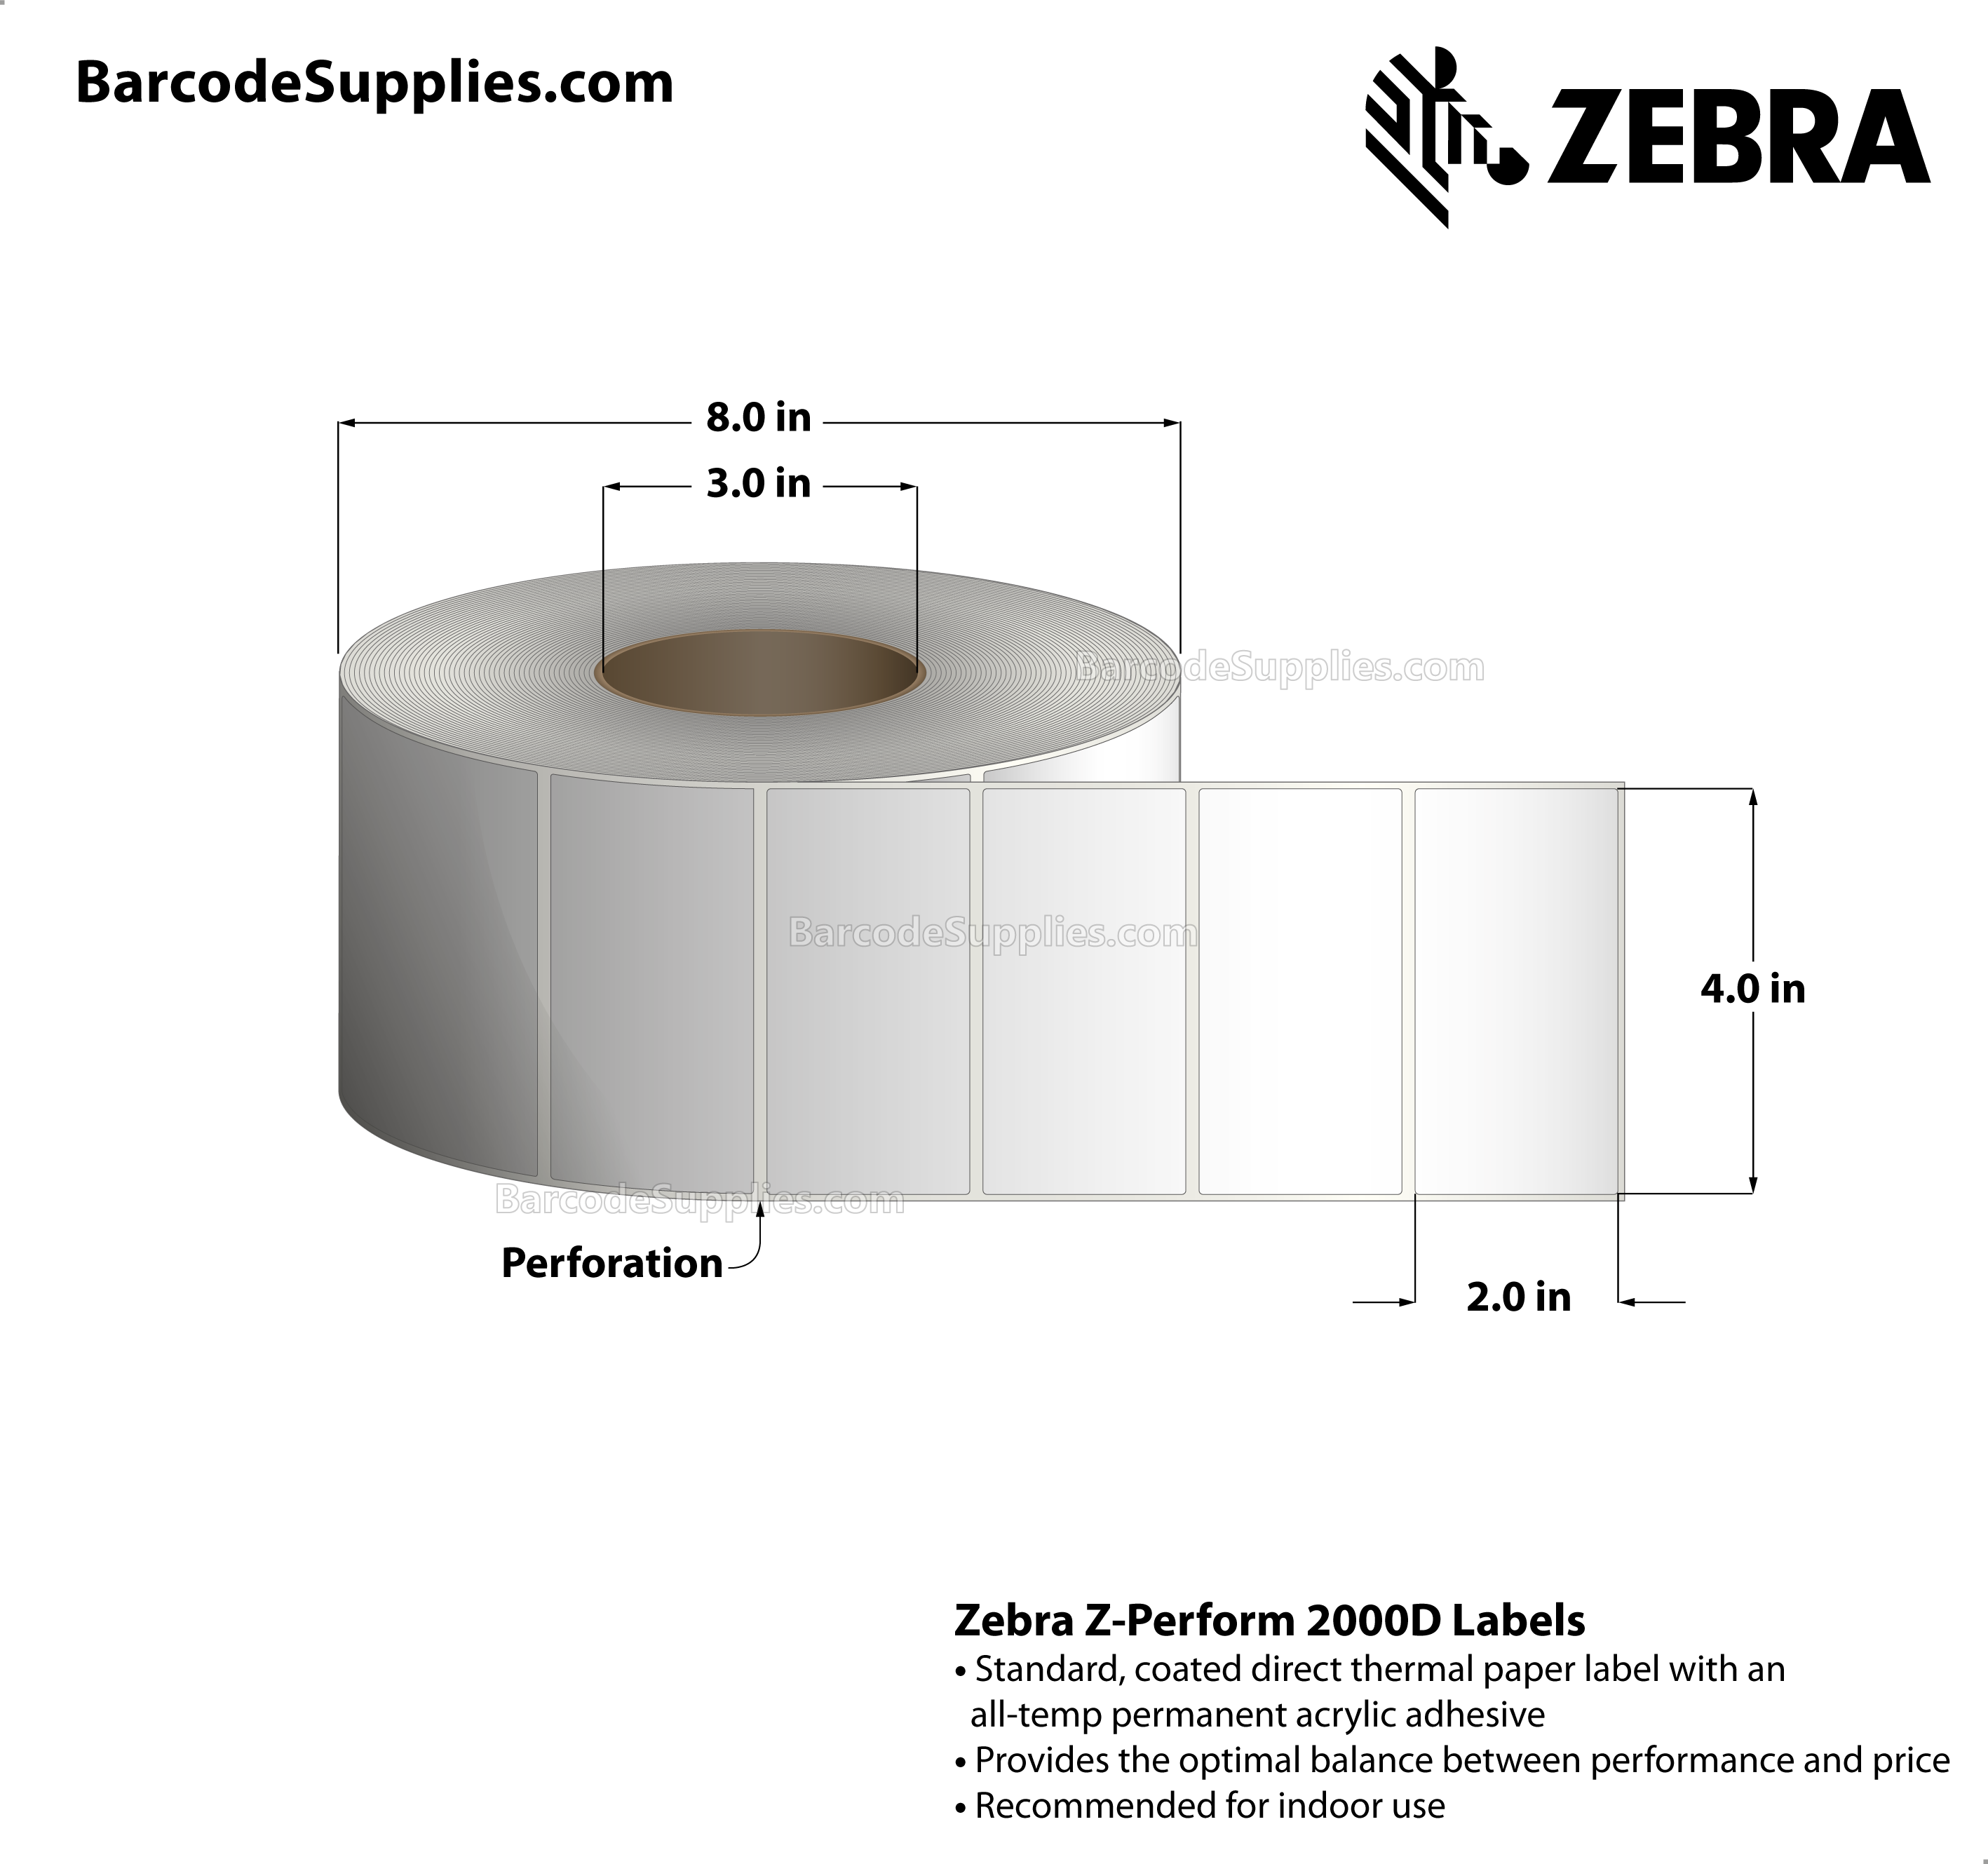 4 x 2 Direct Thermal White Z-Perform 2000D (No Perf) Labels With All-Temp Adhesive - Not Perforated - 2720 Labels Per Roll - Carton Of 4 Rolls - 10880 Labels Total - MPN: 10012164